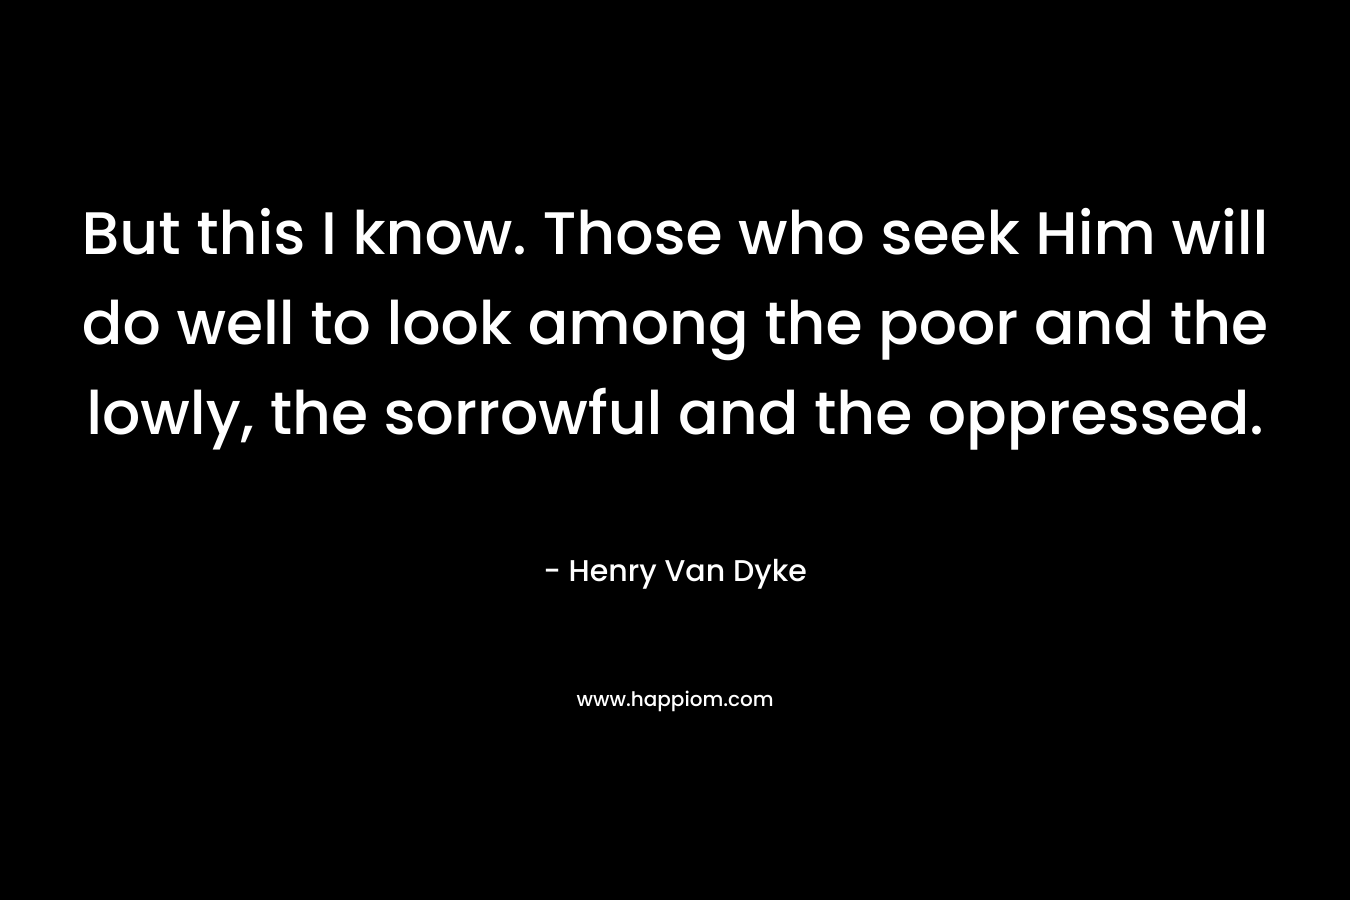 But this I know. Those who seek Him will do well to look among the poor and the lowly, the sorrowful and the oppressed. – Henry Van Dyke